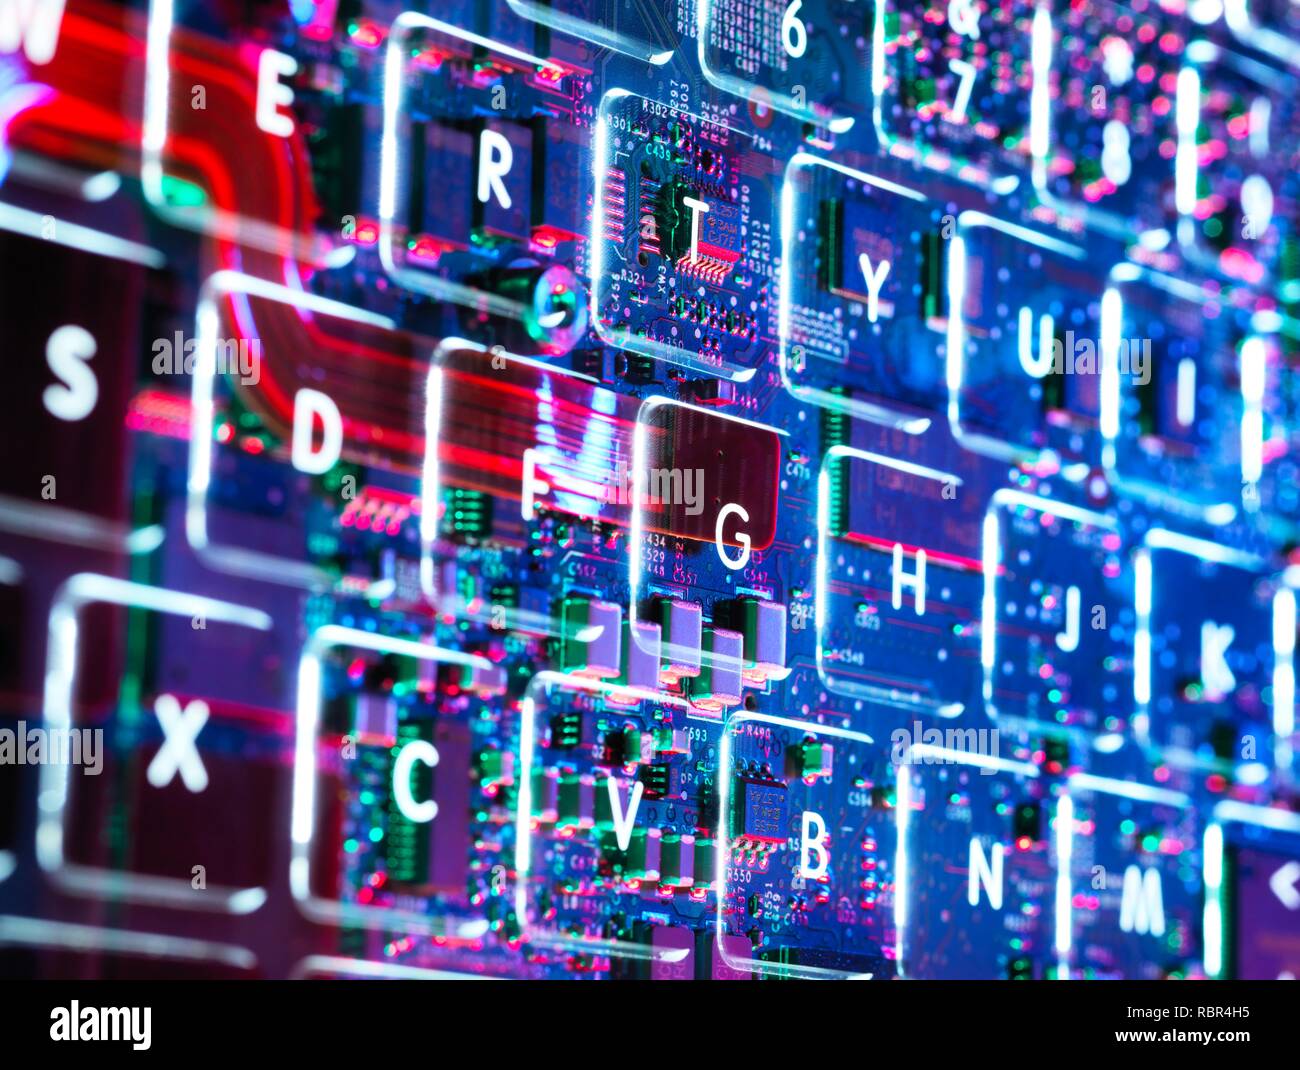 Double exposure of a laptop computer keyboard showing the electronics underneath. Stock Photo